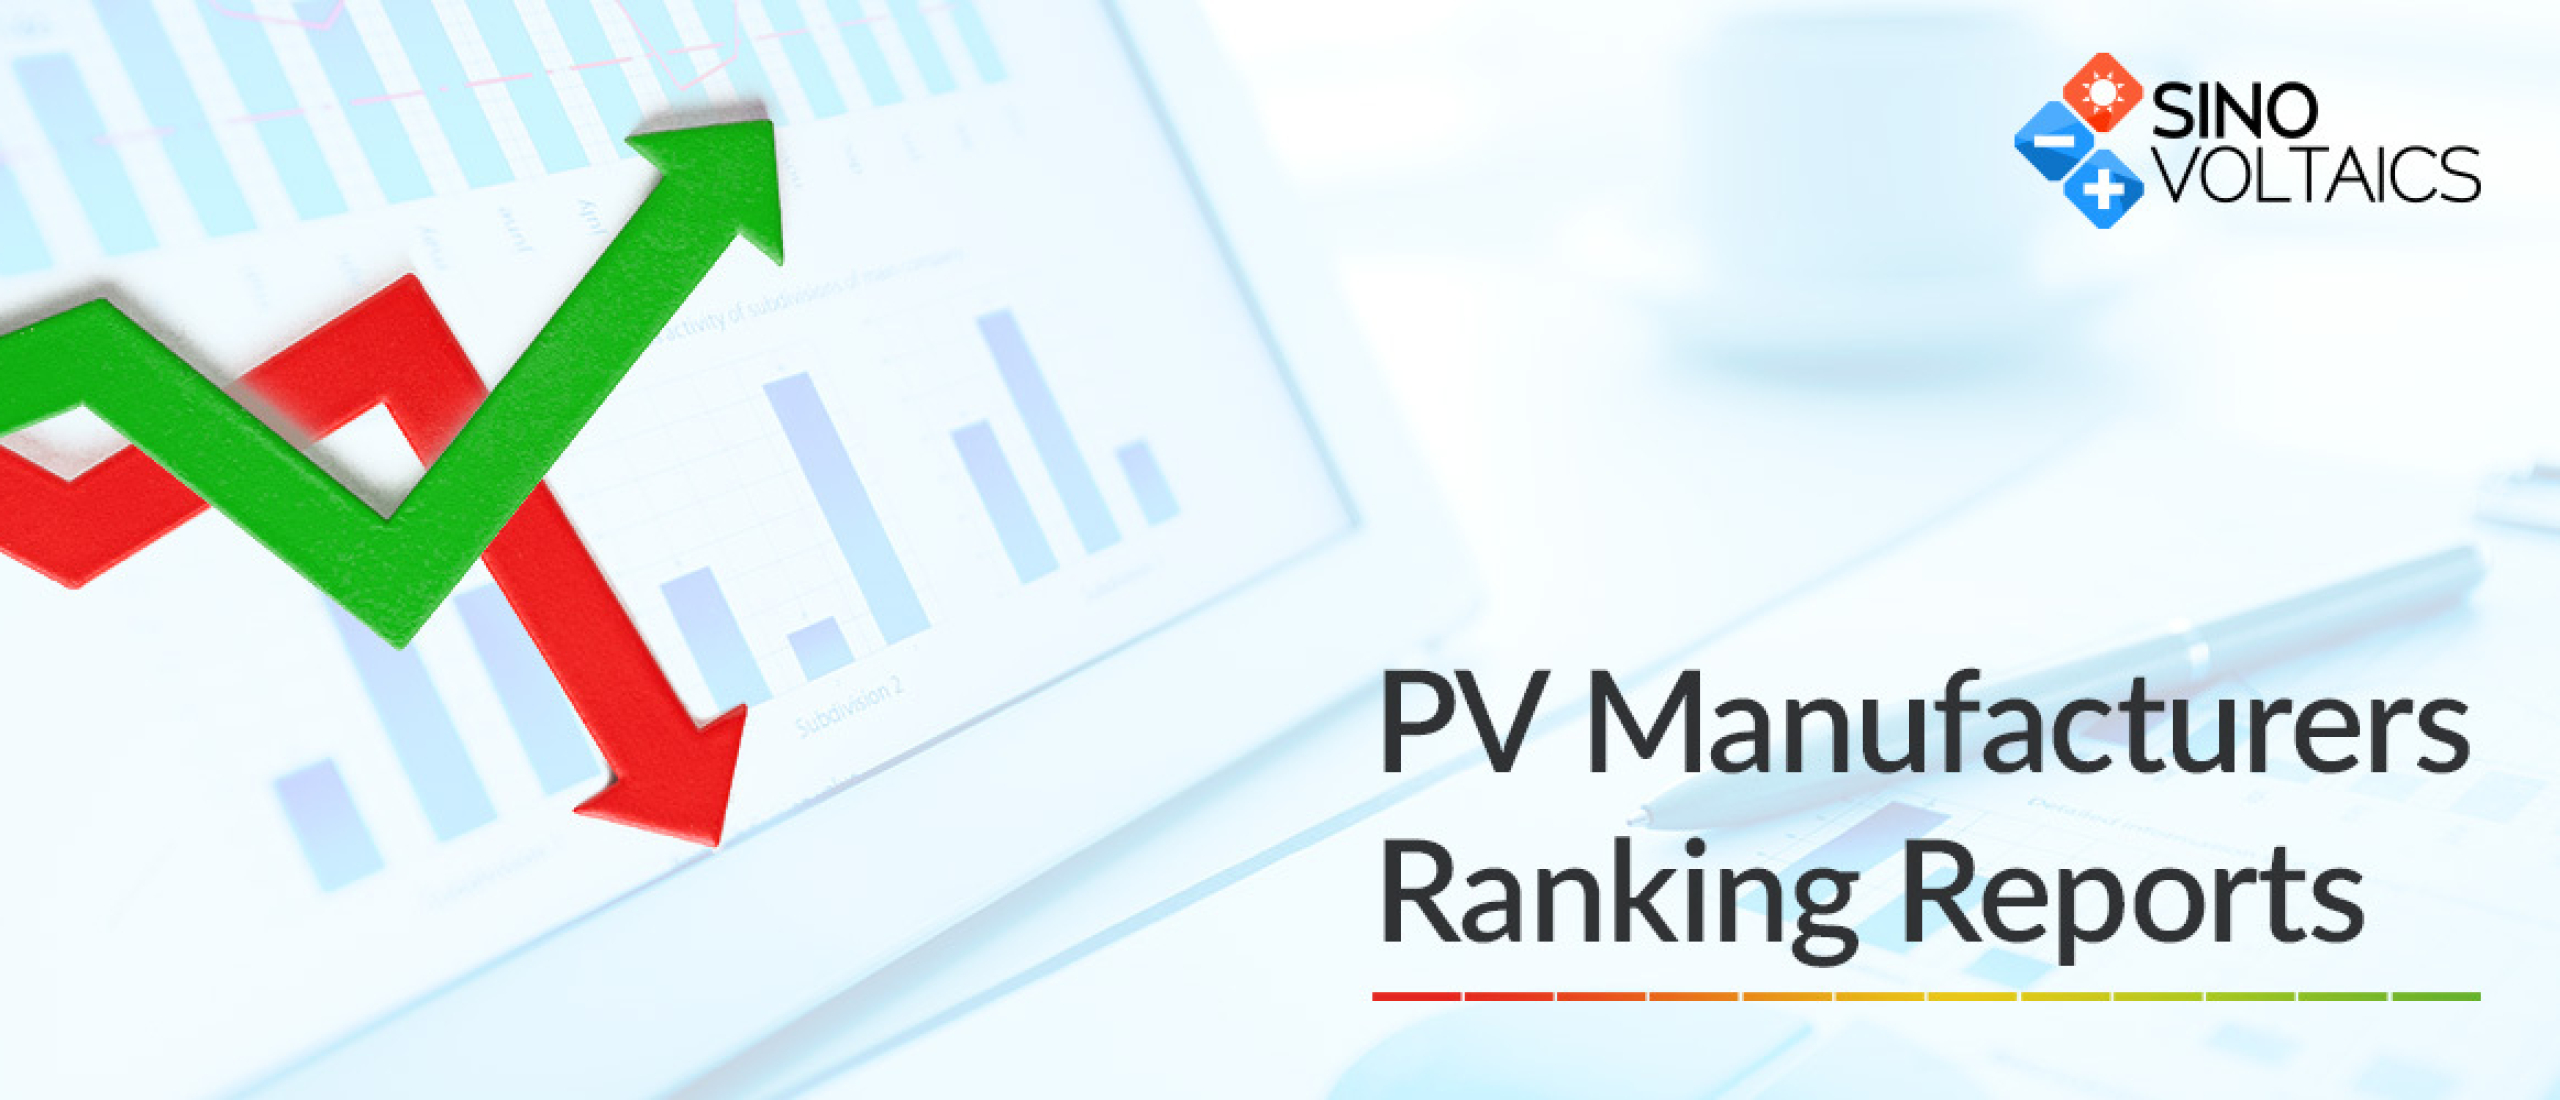 Sinovoltaics PV Manufacturers Ranking Reports